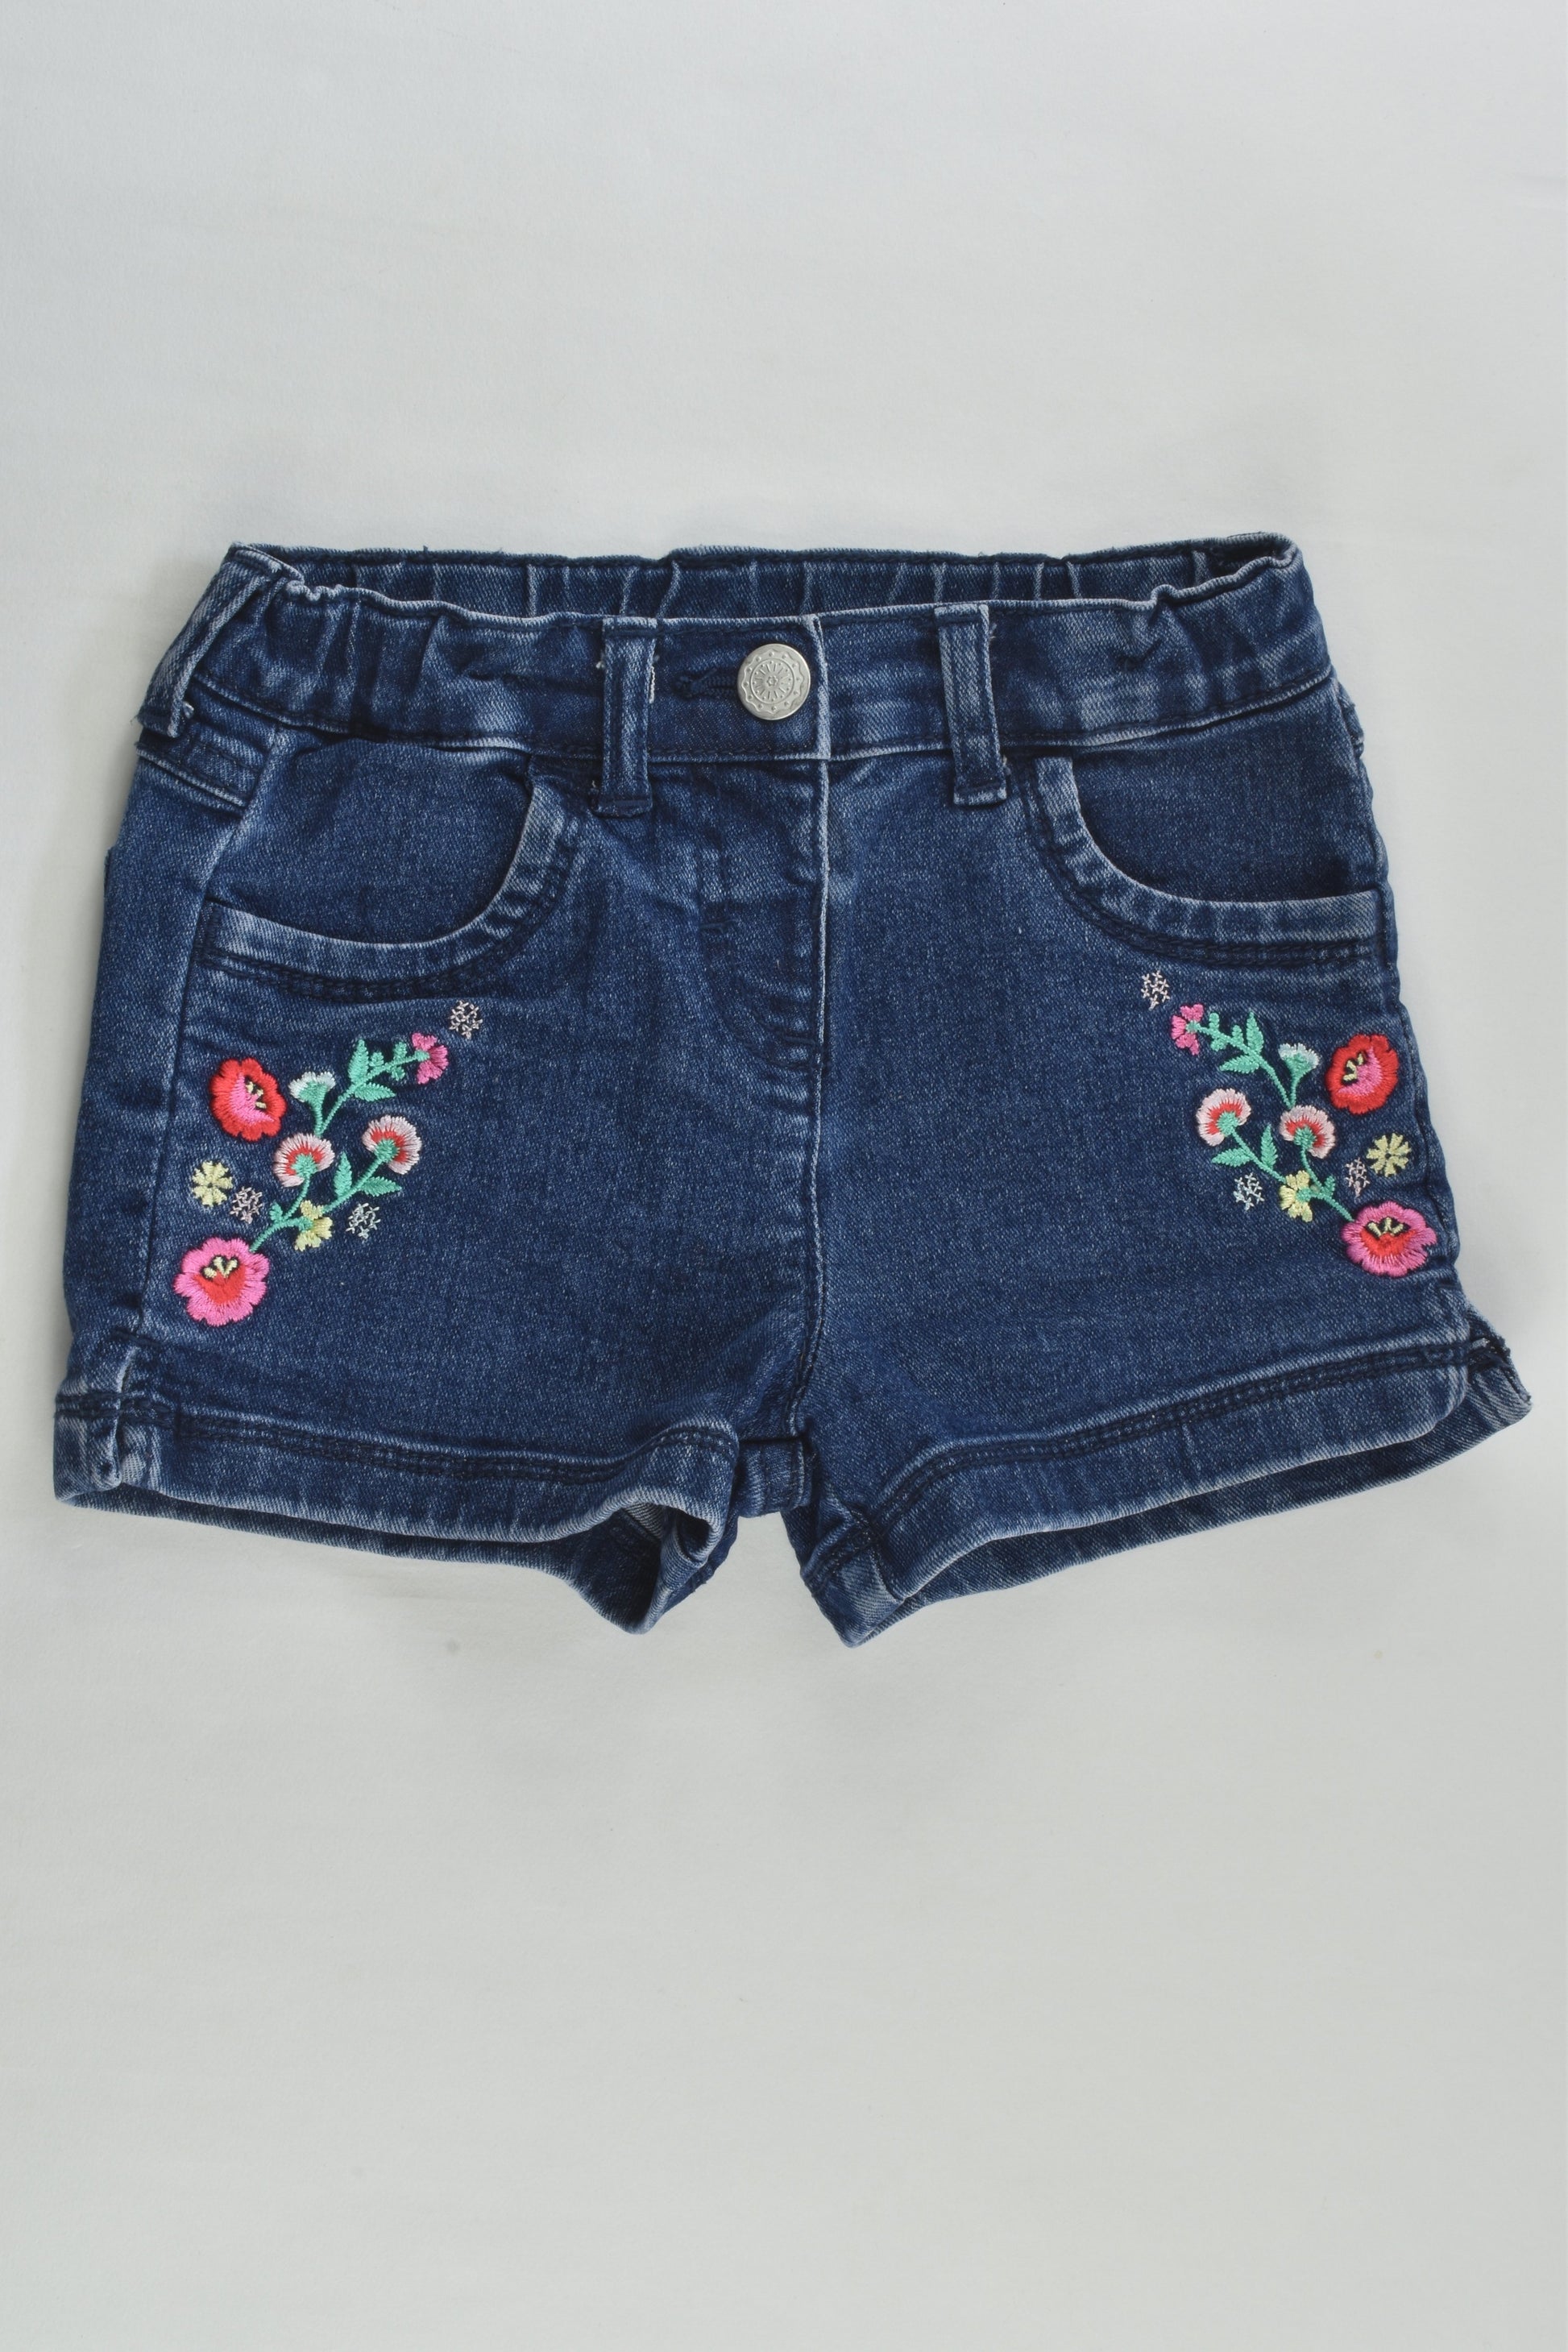 H&T Size 5 Stretchy Embroidery Denim Shorts